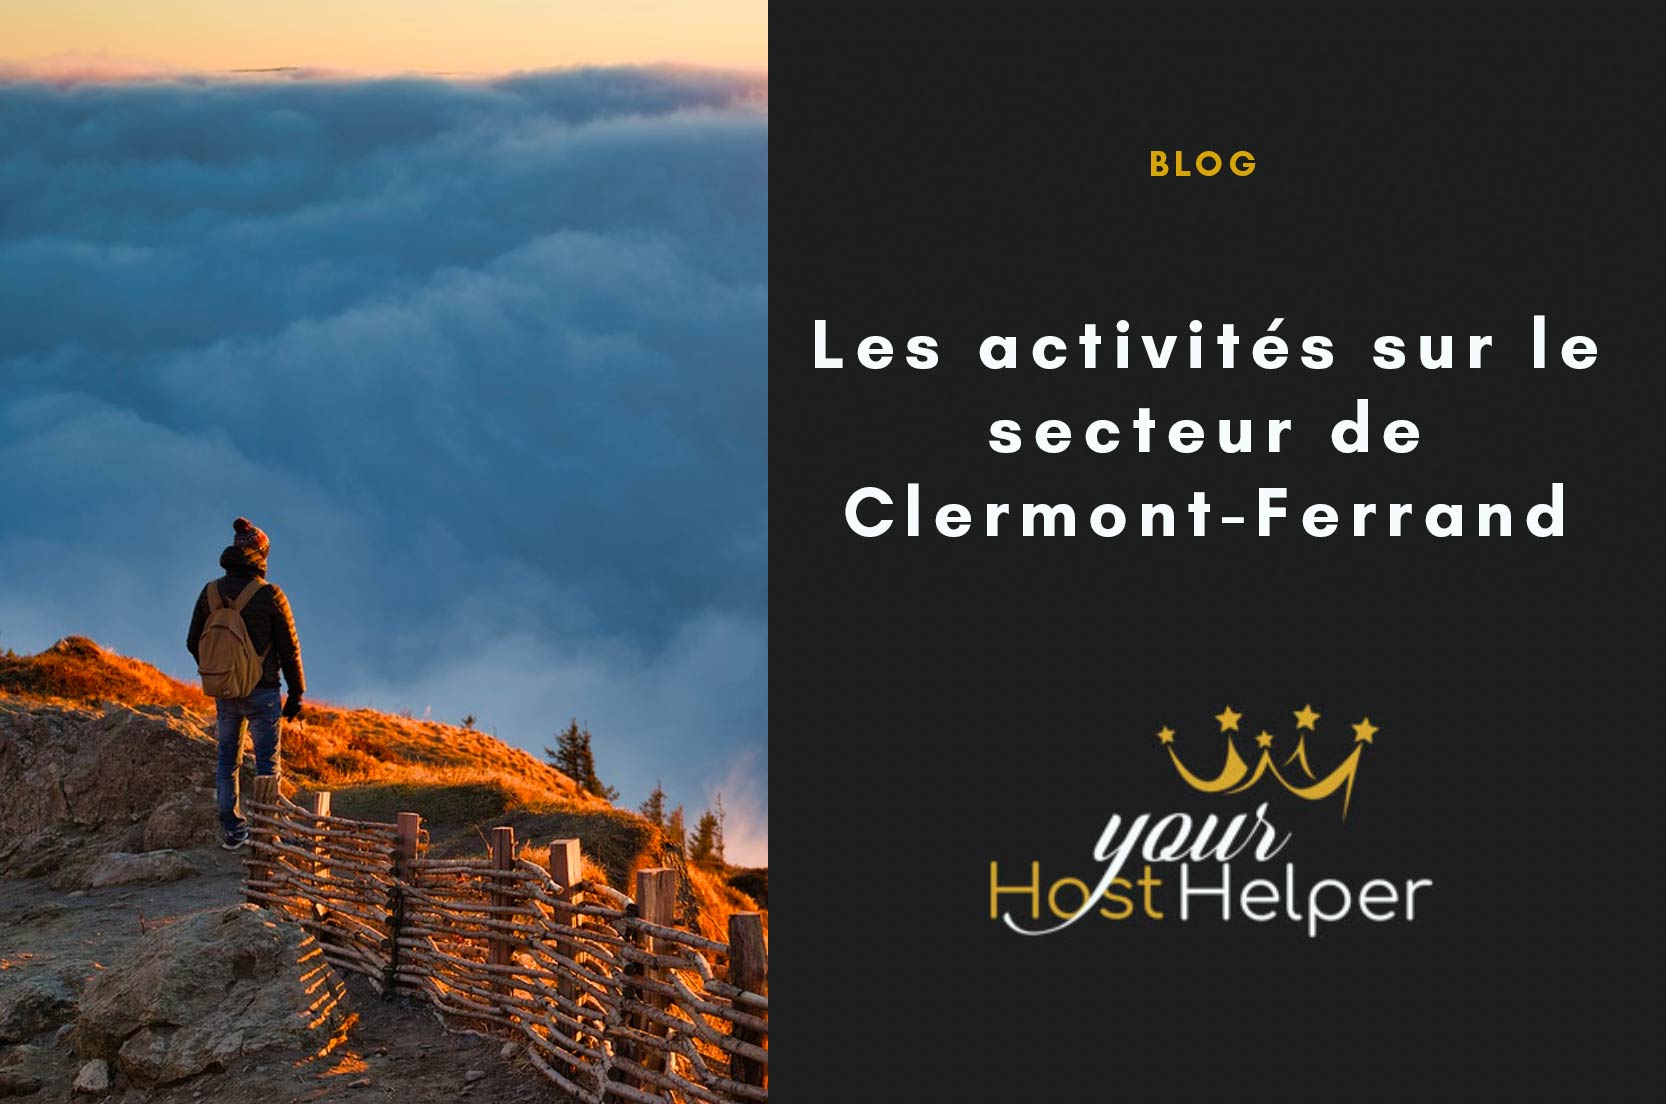 You are currently viewing What to do in Clermont-Ferrand? Suggestions from our concierge YourHostHelper